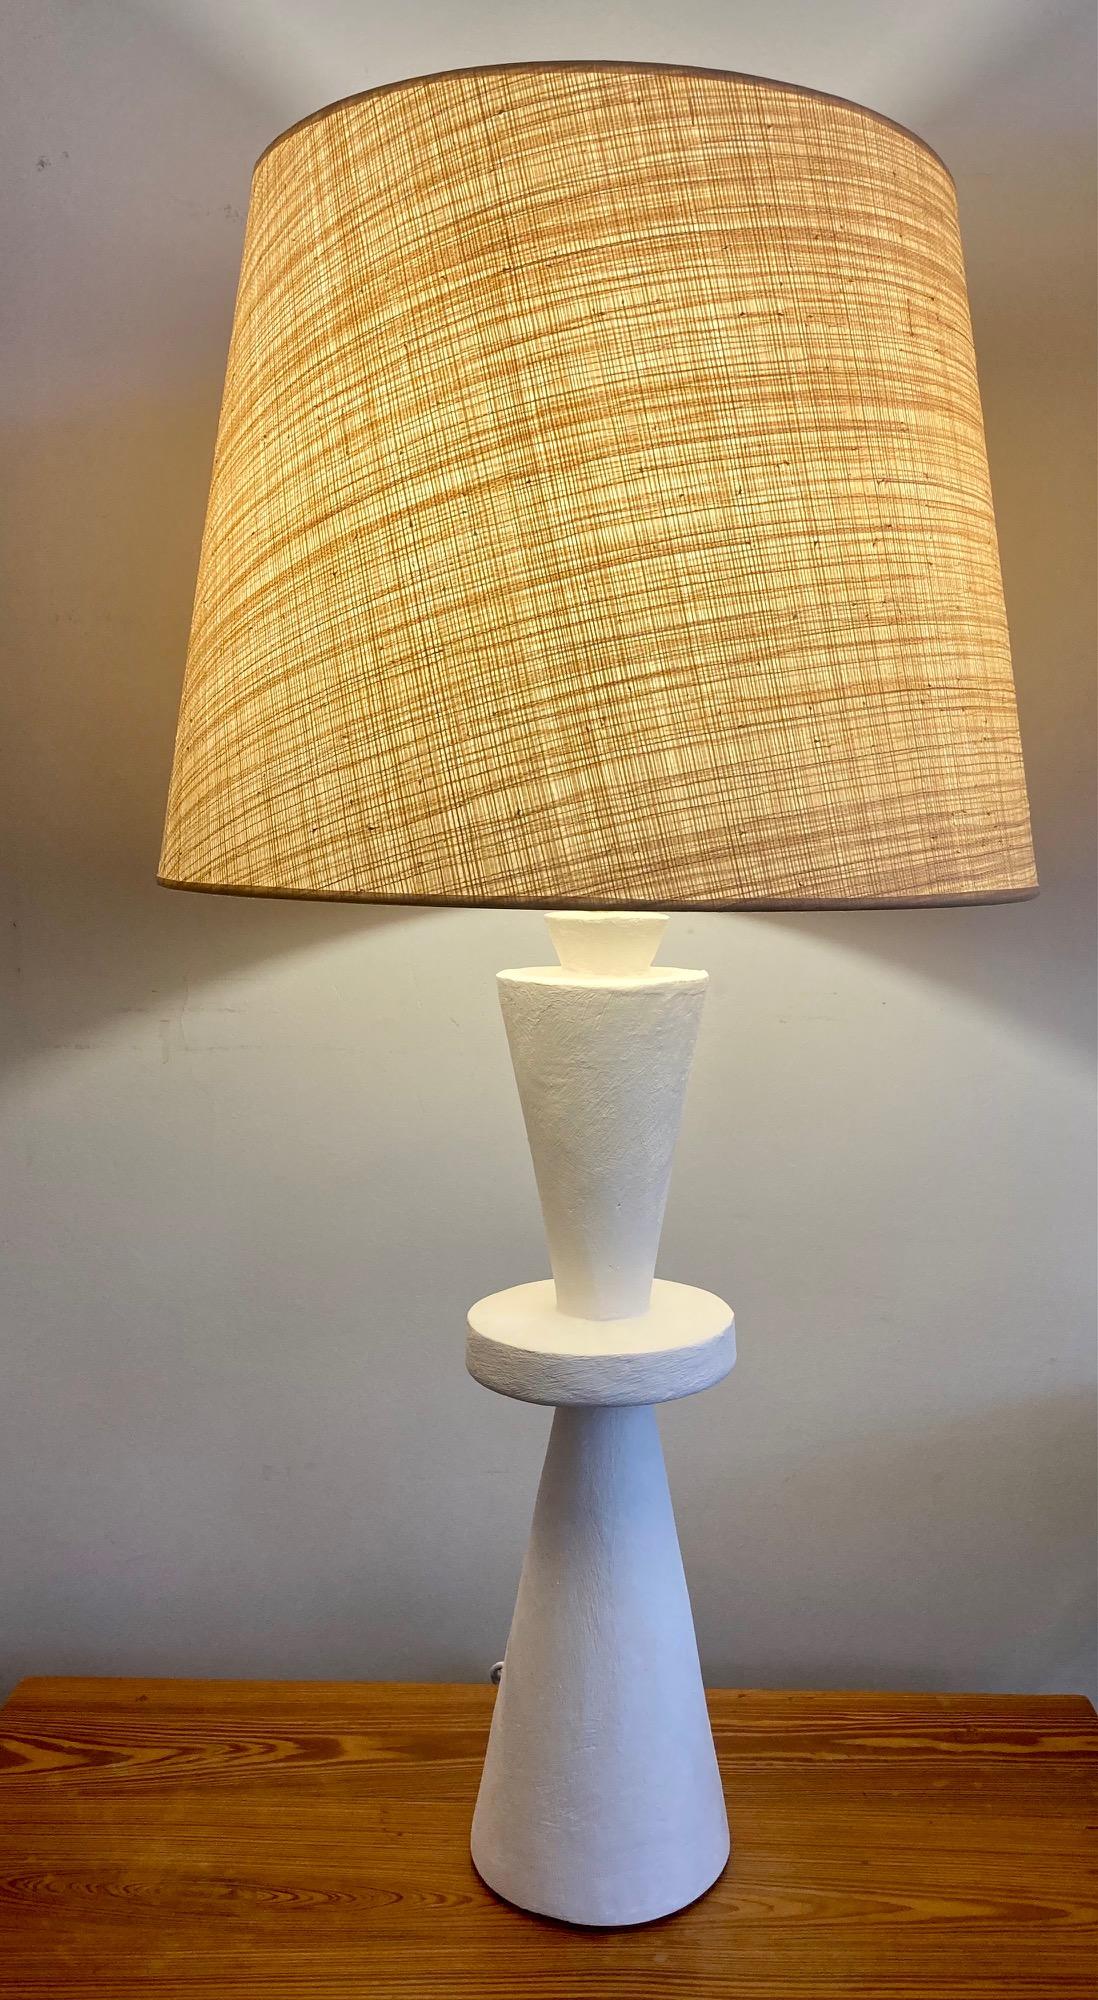 Pair of stuccoed plaster lamps
The finish of the plasterwork is slightly textured (see detail pictures) 
With custom made shades in vegetal fiber.
Inspired by Jean-Michel Frank
France, modern production
Model: 